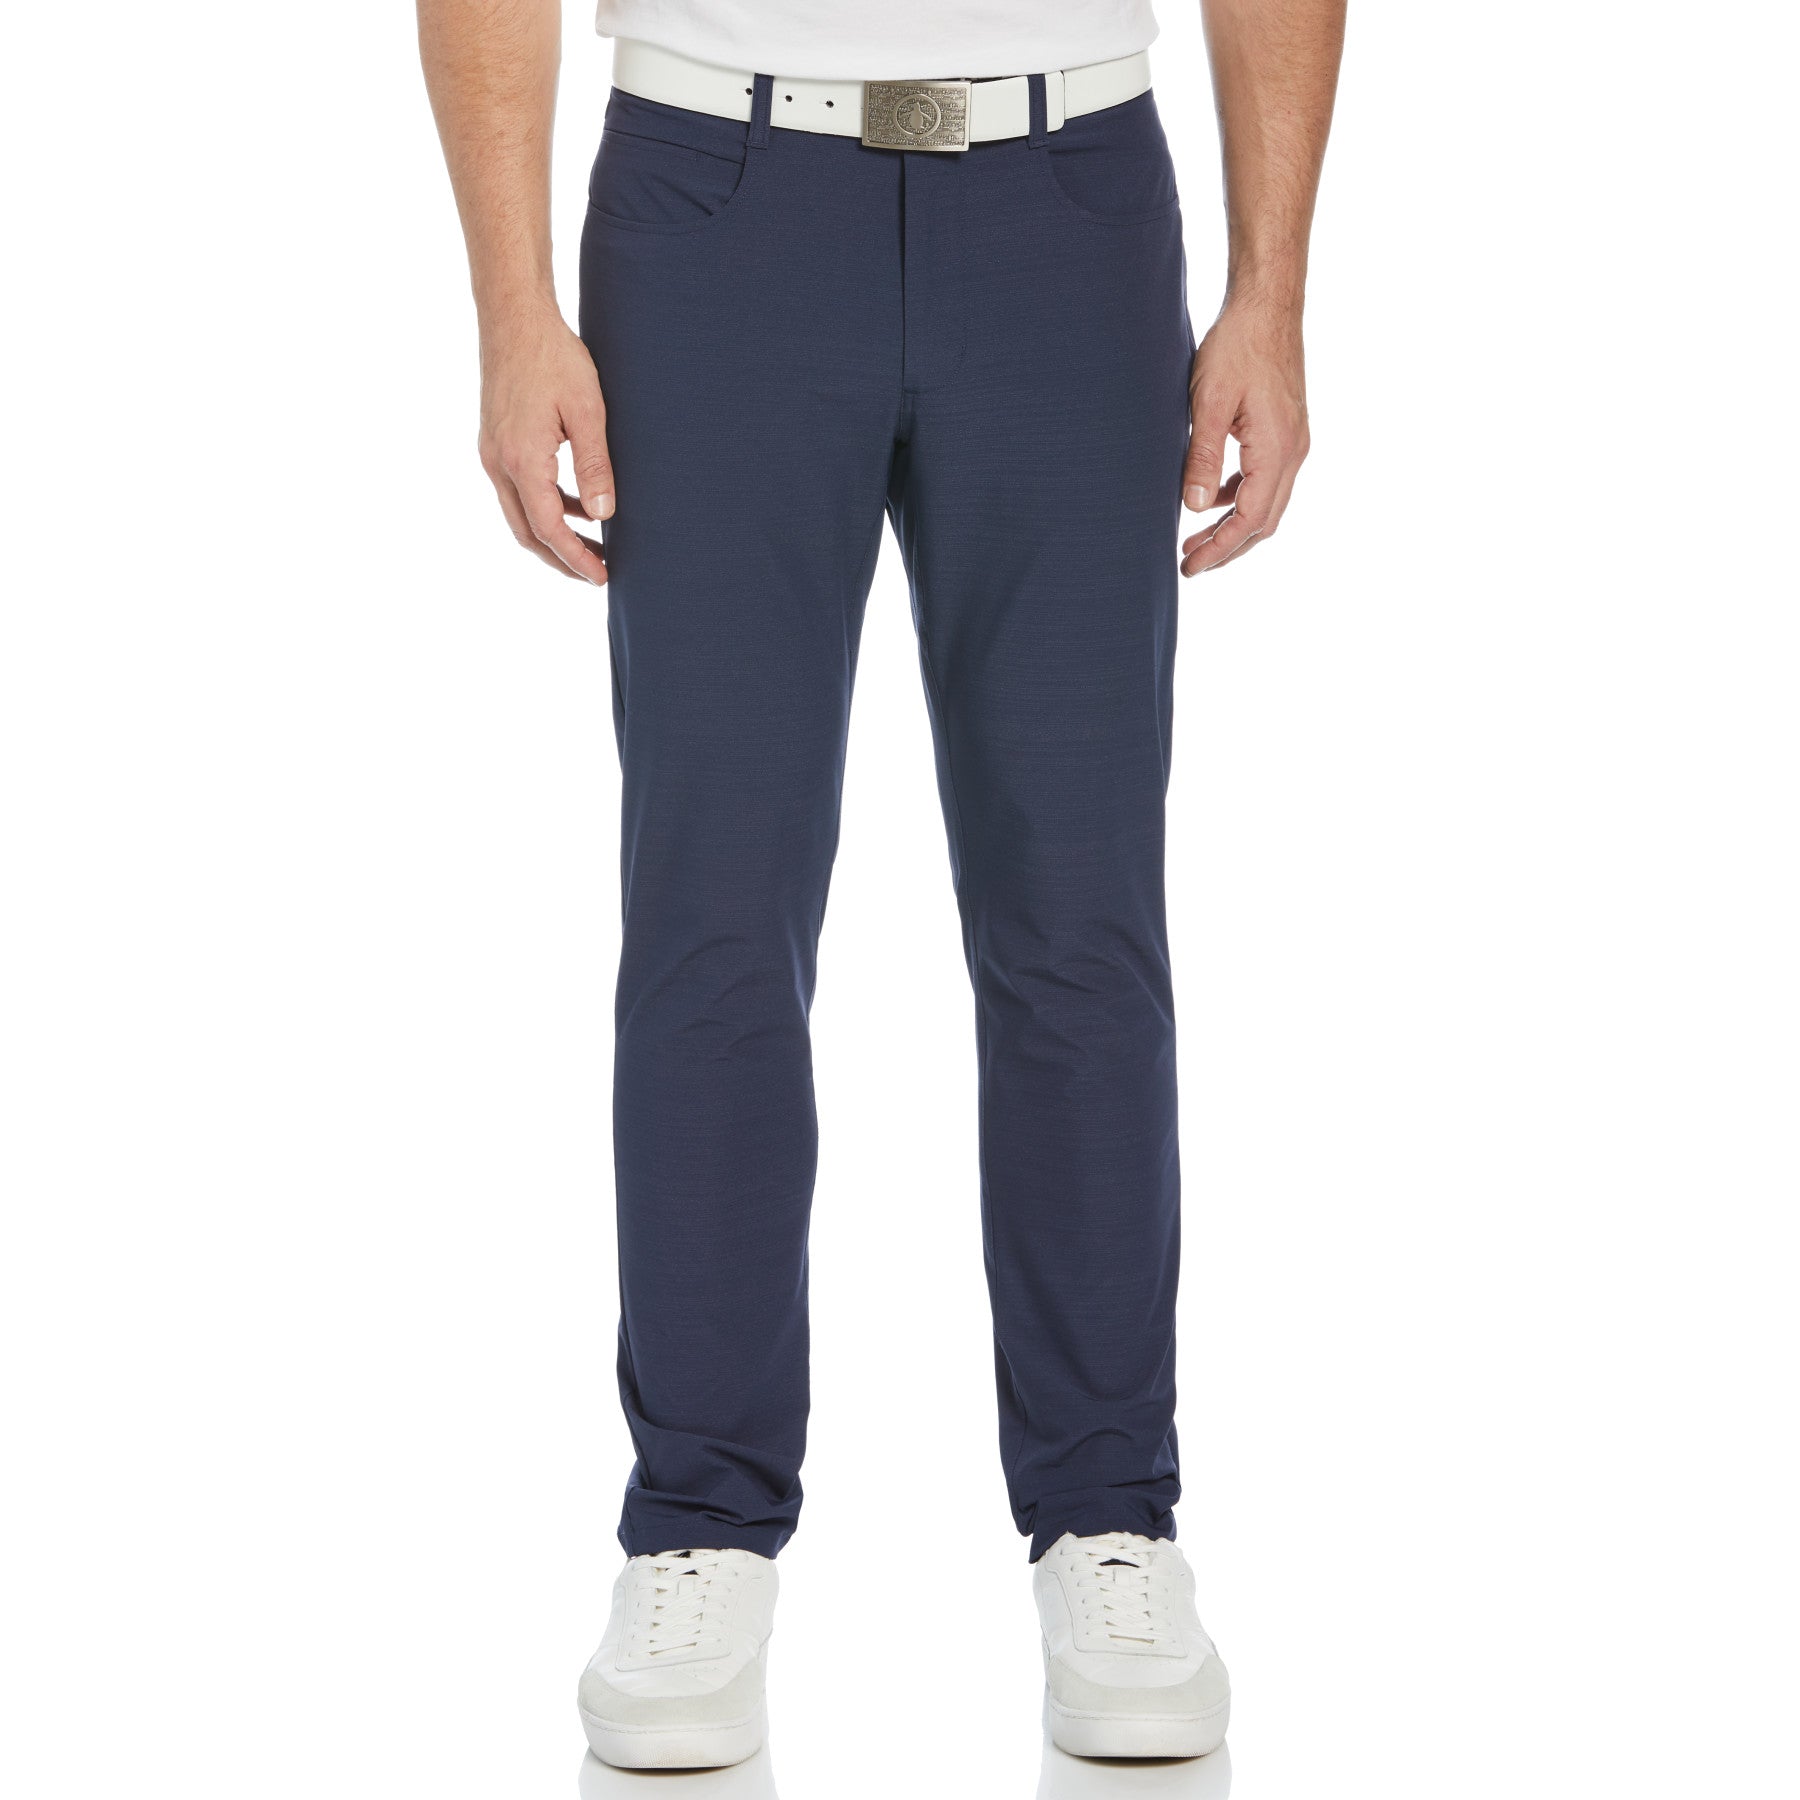 View Performance Crossover Golf Trouser In Black Iris information